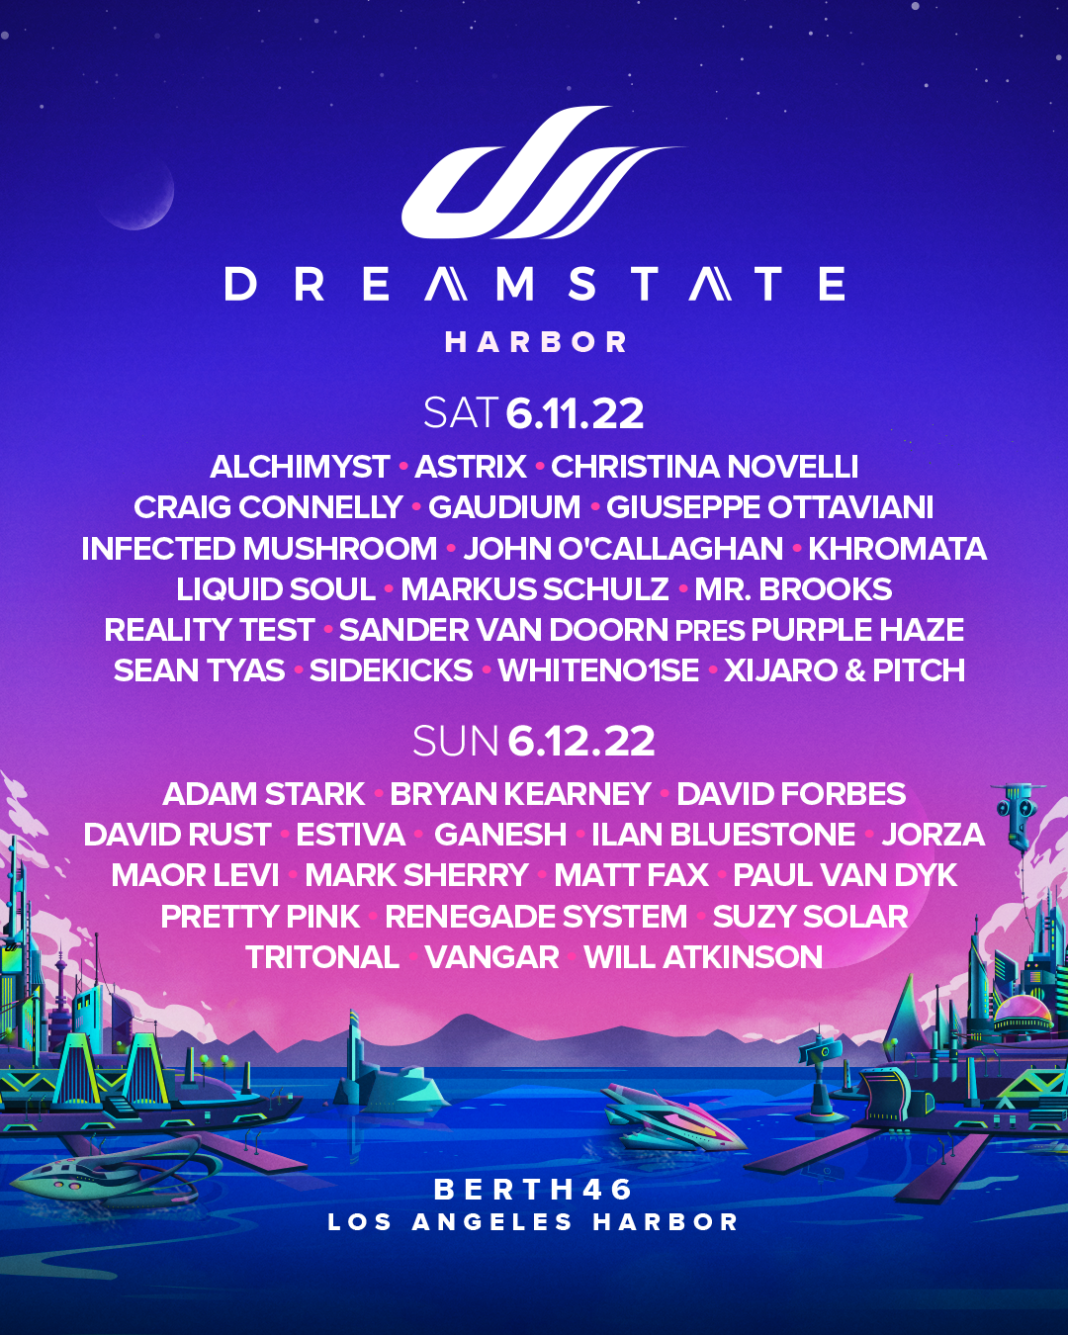 Top 5 Must-See Acts At Dreamstate Harbor - EDMTunes